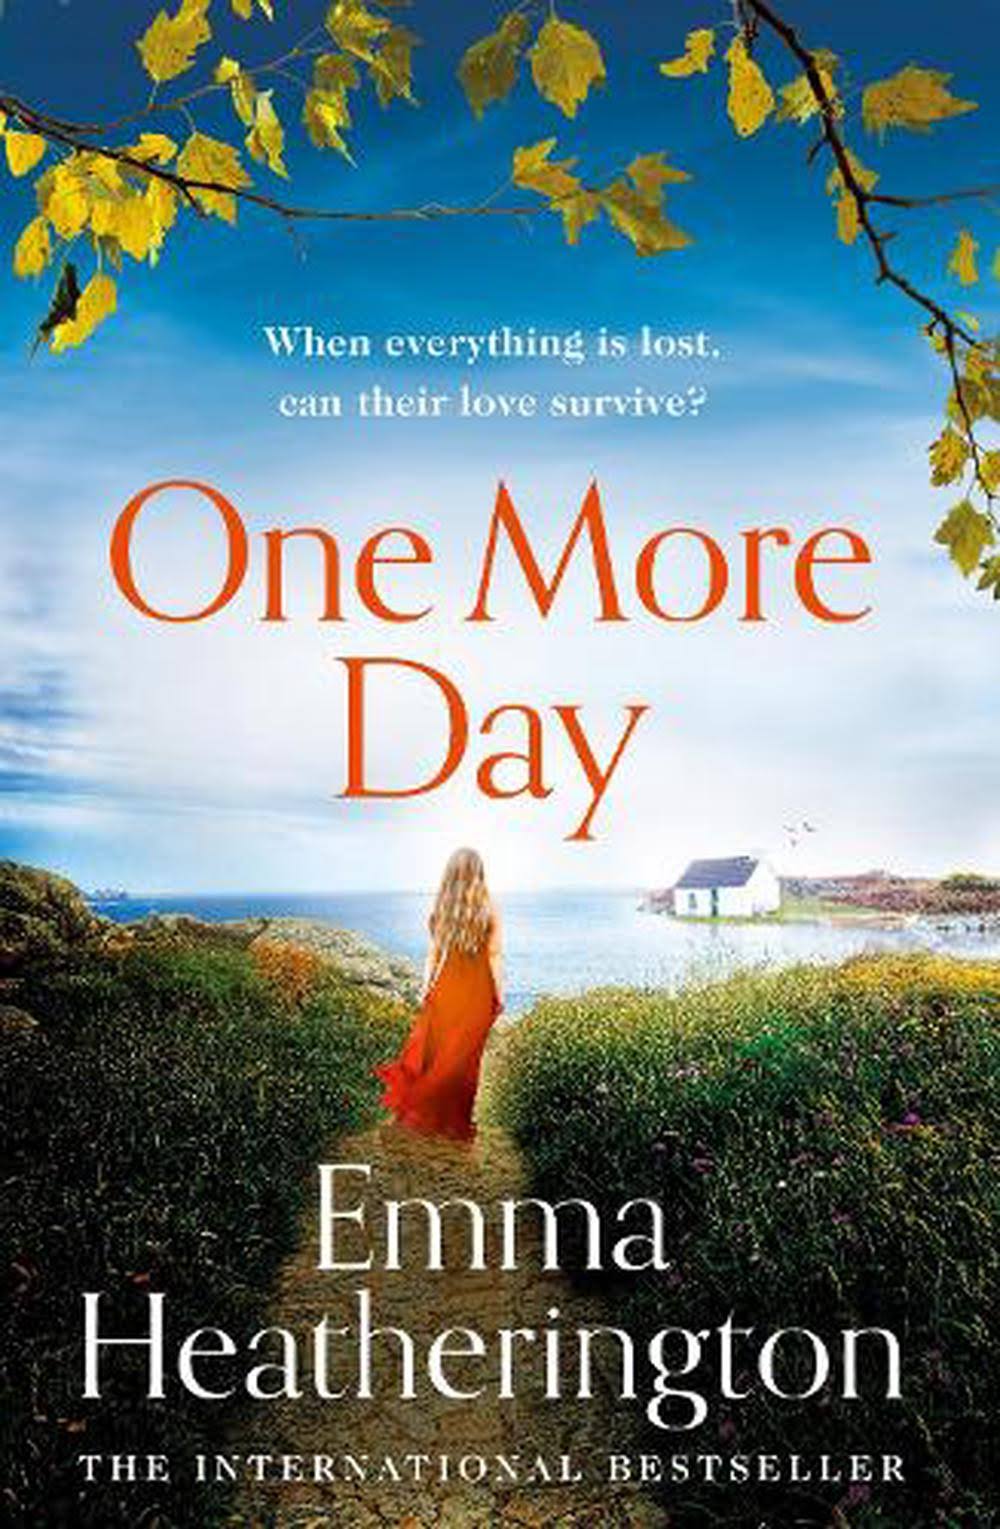 One More Day by Emma Heatherington